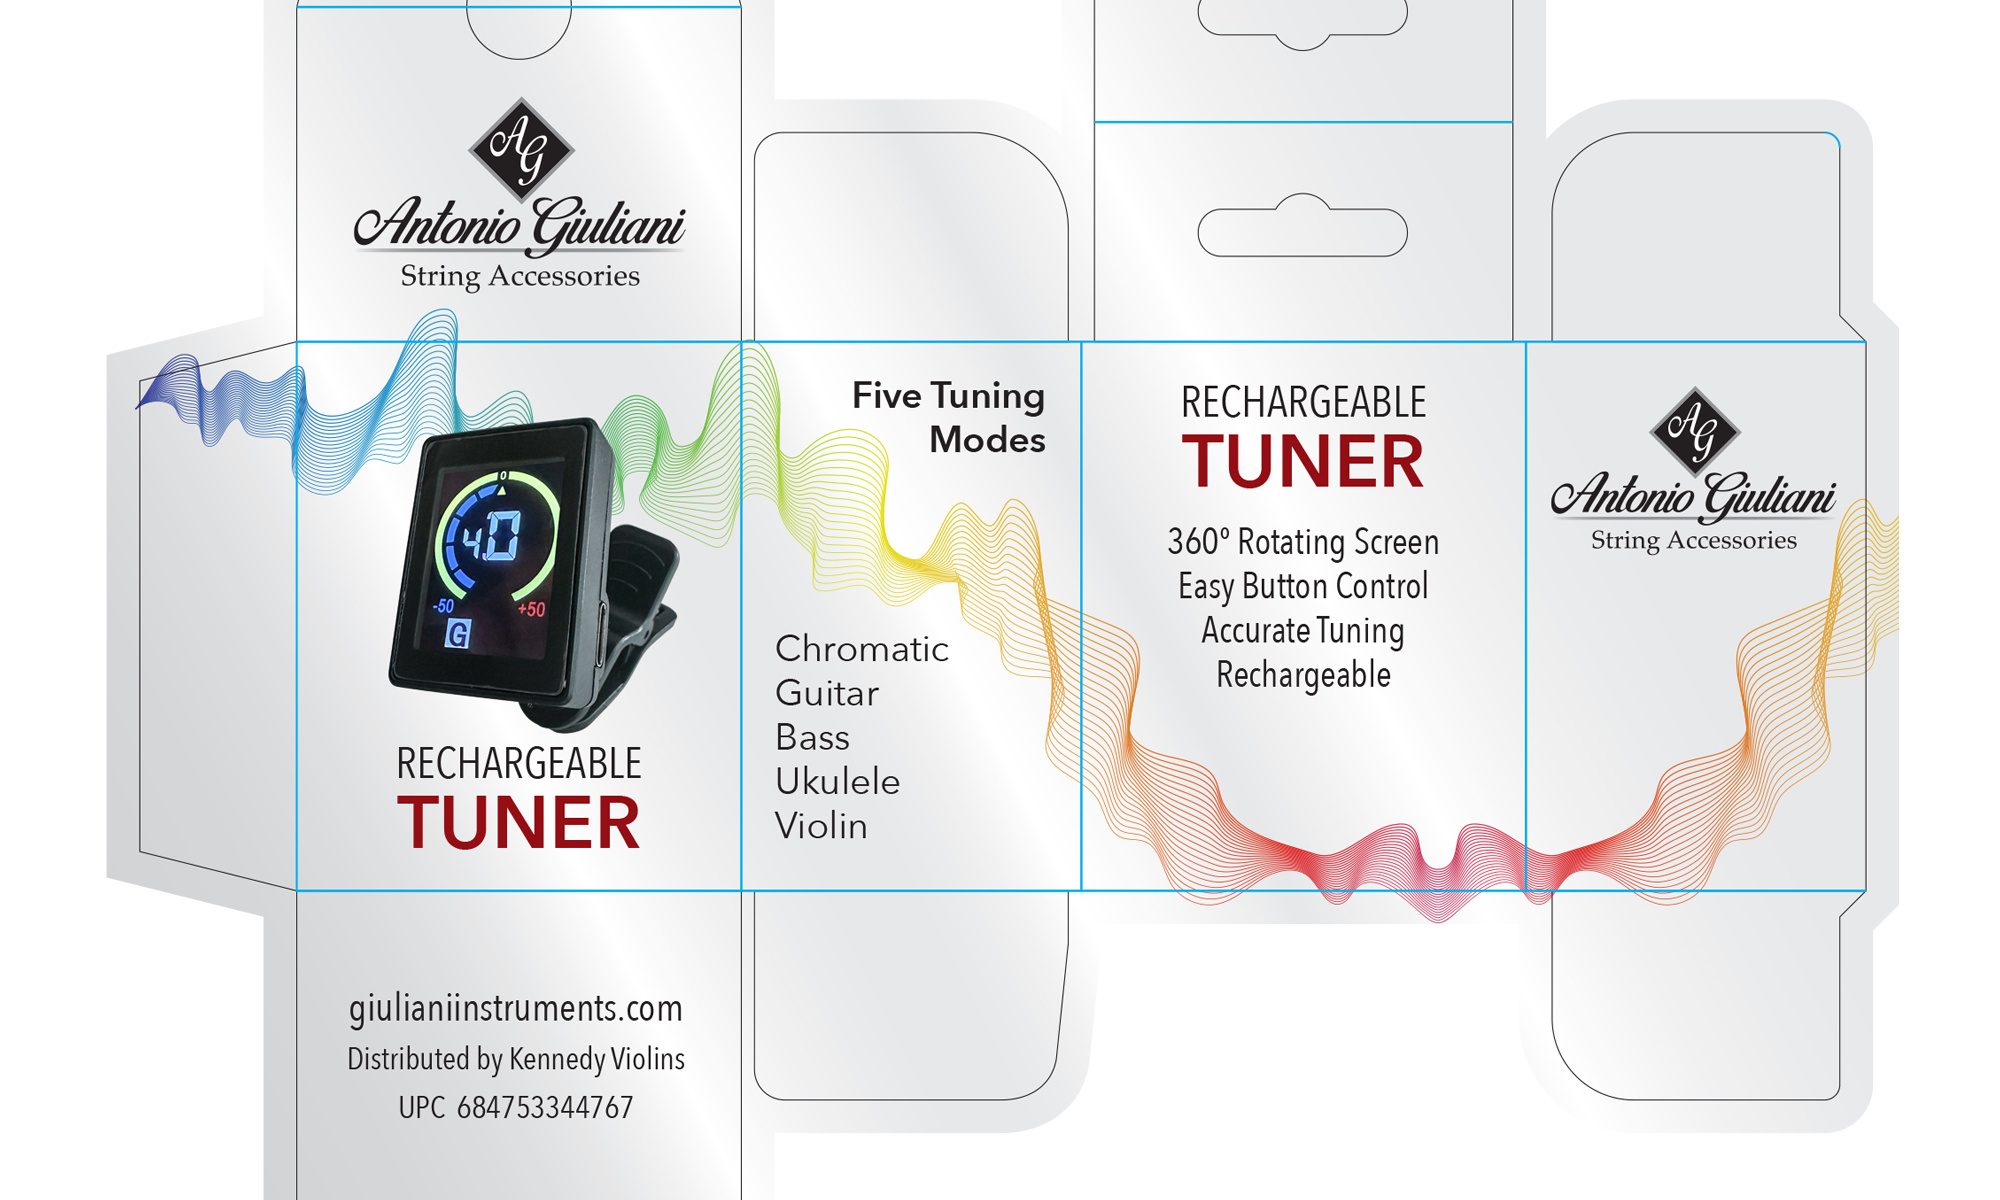 Rechargeable Tuner Packaging